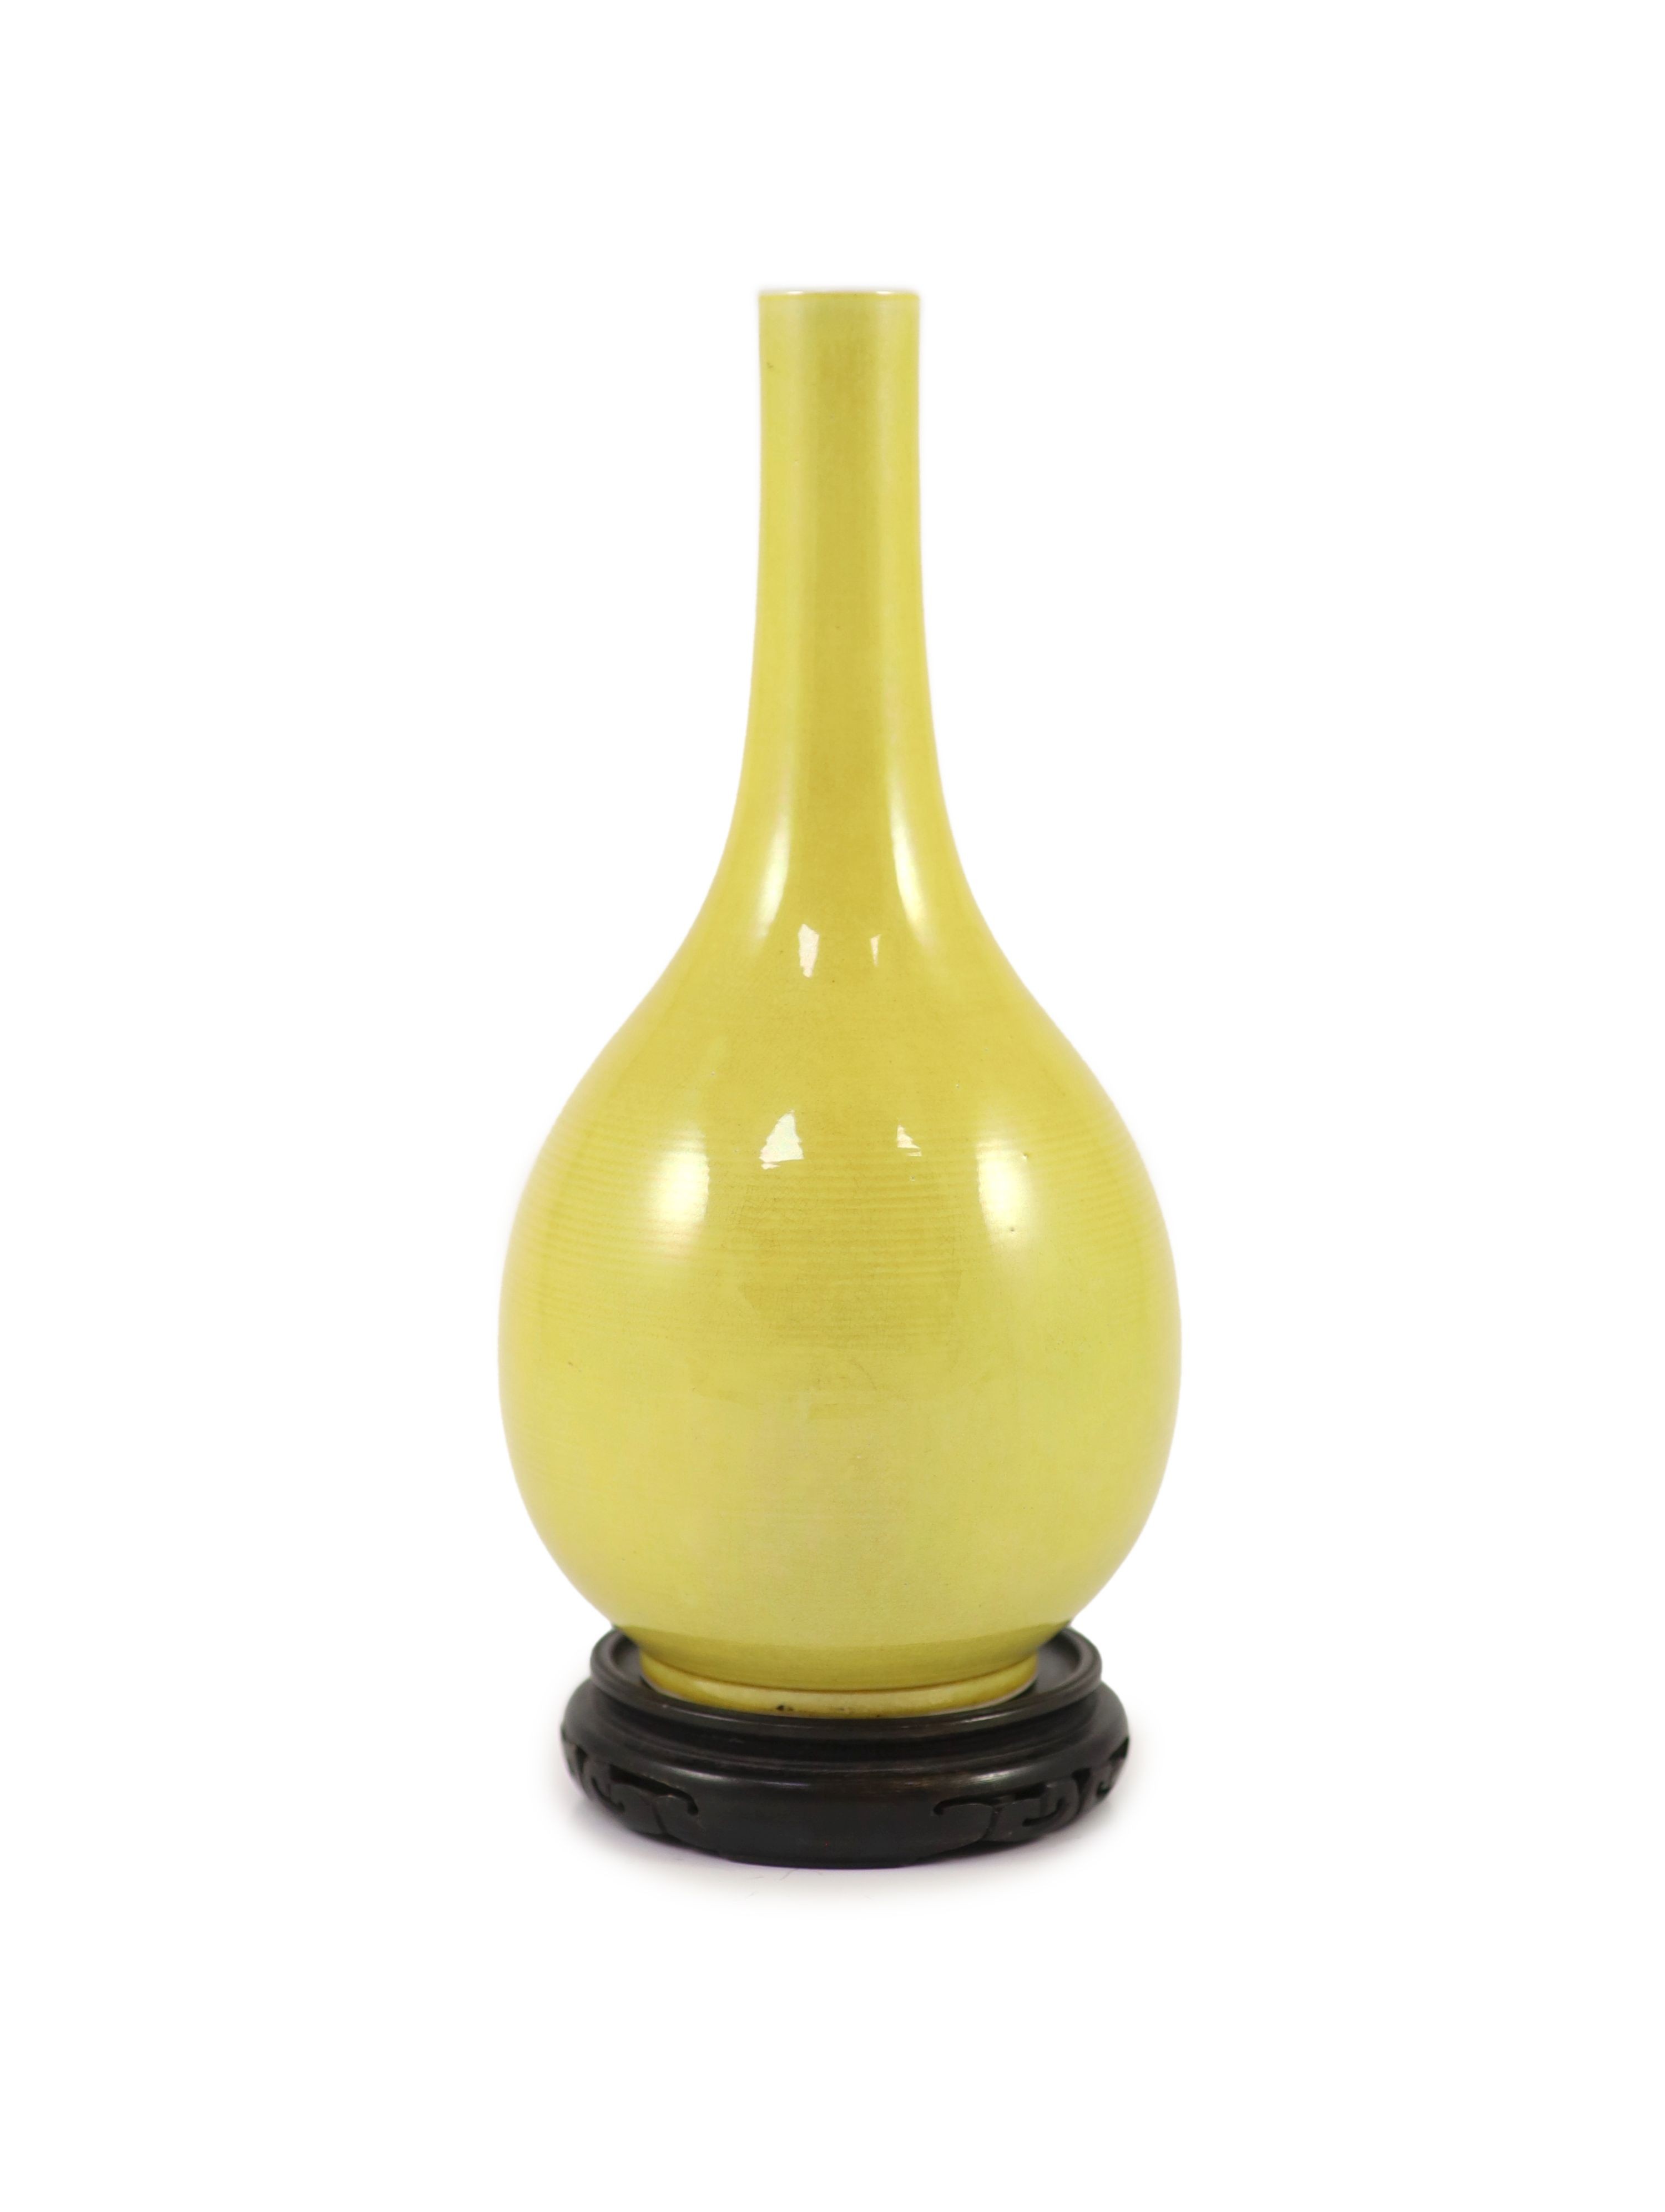 A Chinese yellow ground narrow neck bottle vase, Yongzheng mark but mid 20th century, 24.5cm high, wood stand